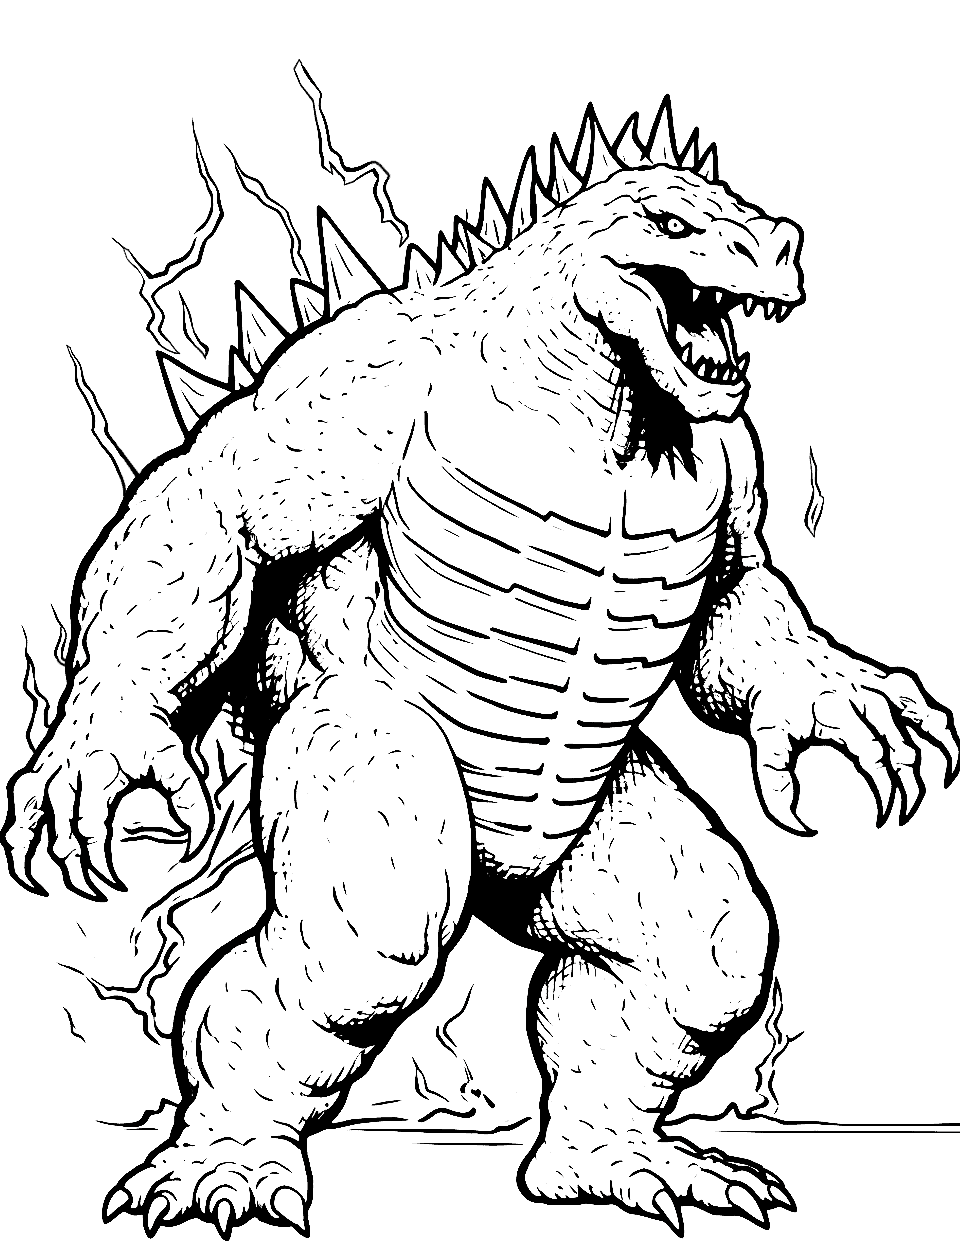 Super Godzilla Power Coloring Page - A powered-up Godzilla with glowing spines, ready for action.